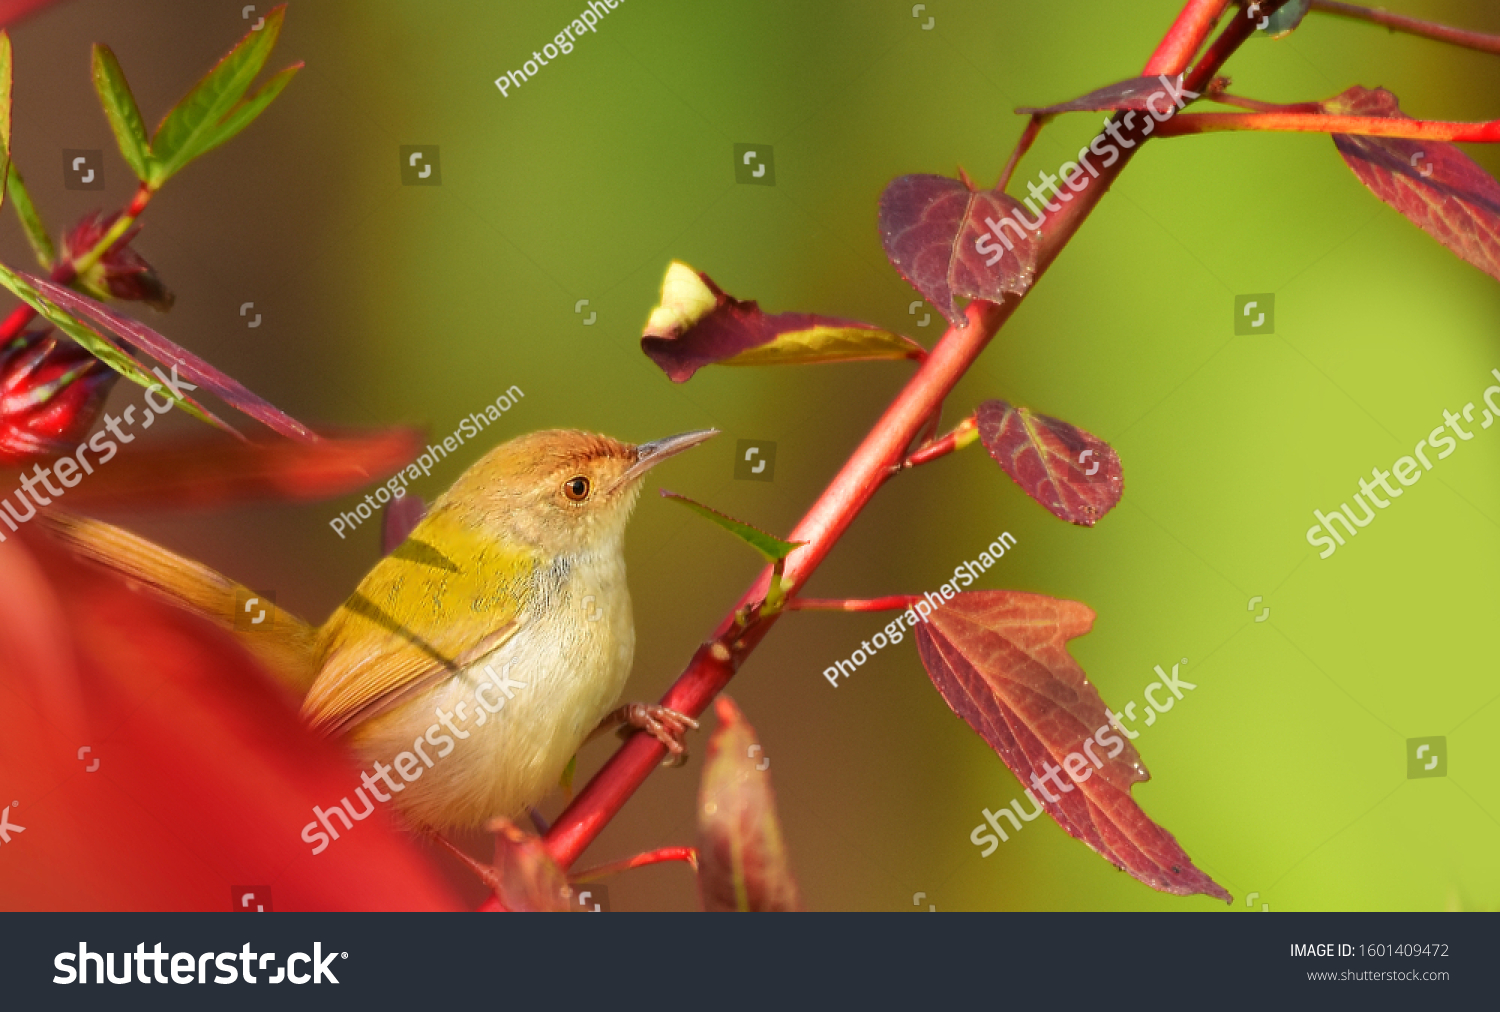 The common tailorbird is a brightly coloured bird, with bright green upperparts and creamy underparts. They range in size from 10 to 14 centimetres (3.9 to 5.5 in) and weigh 6 to 10 grams. #1601409472